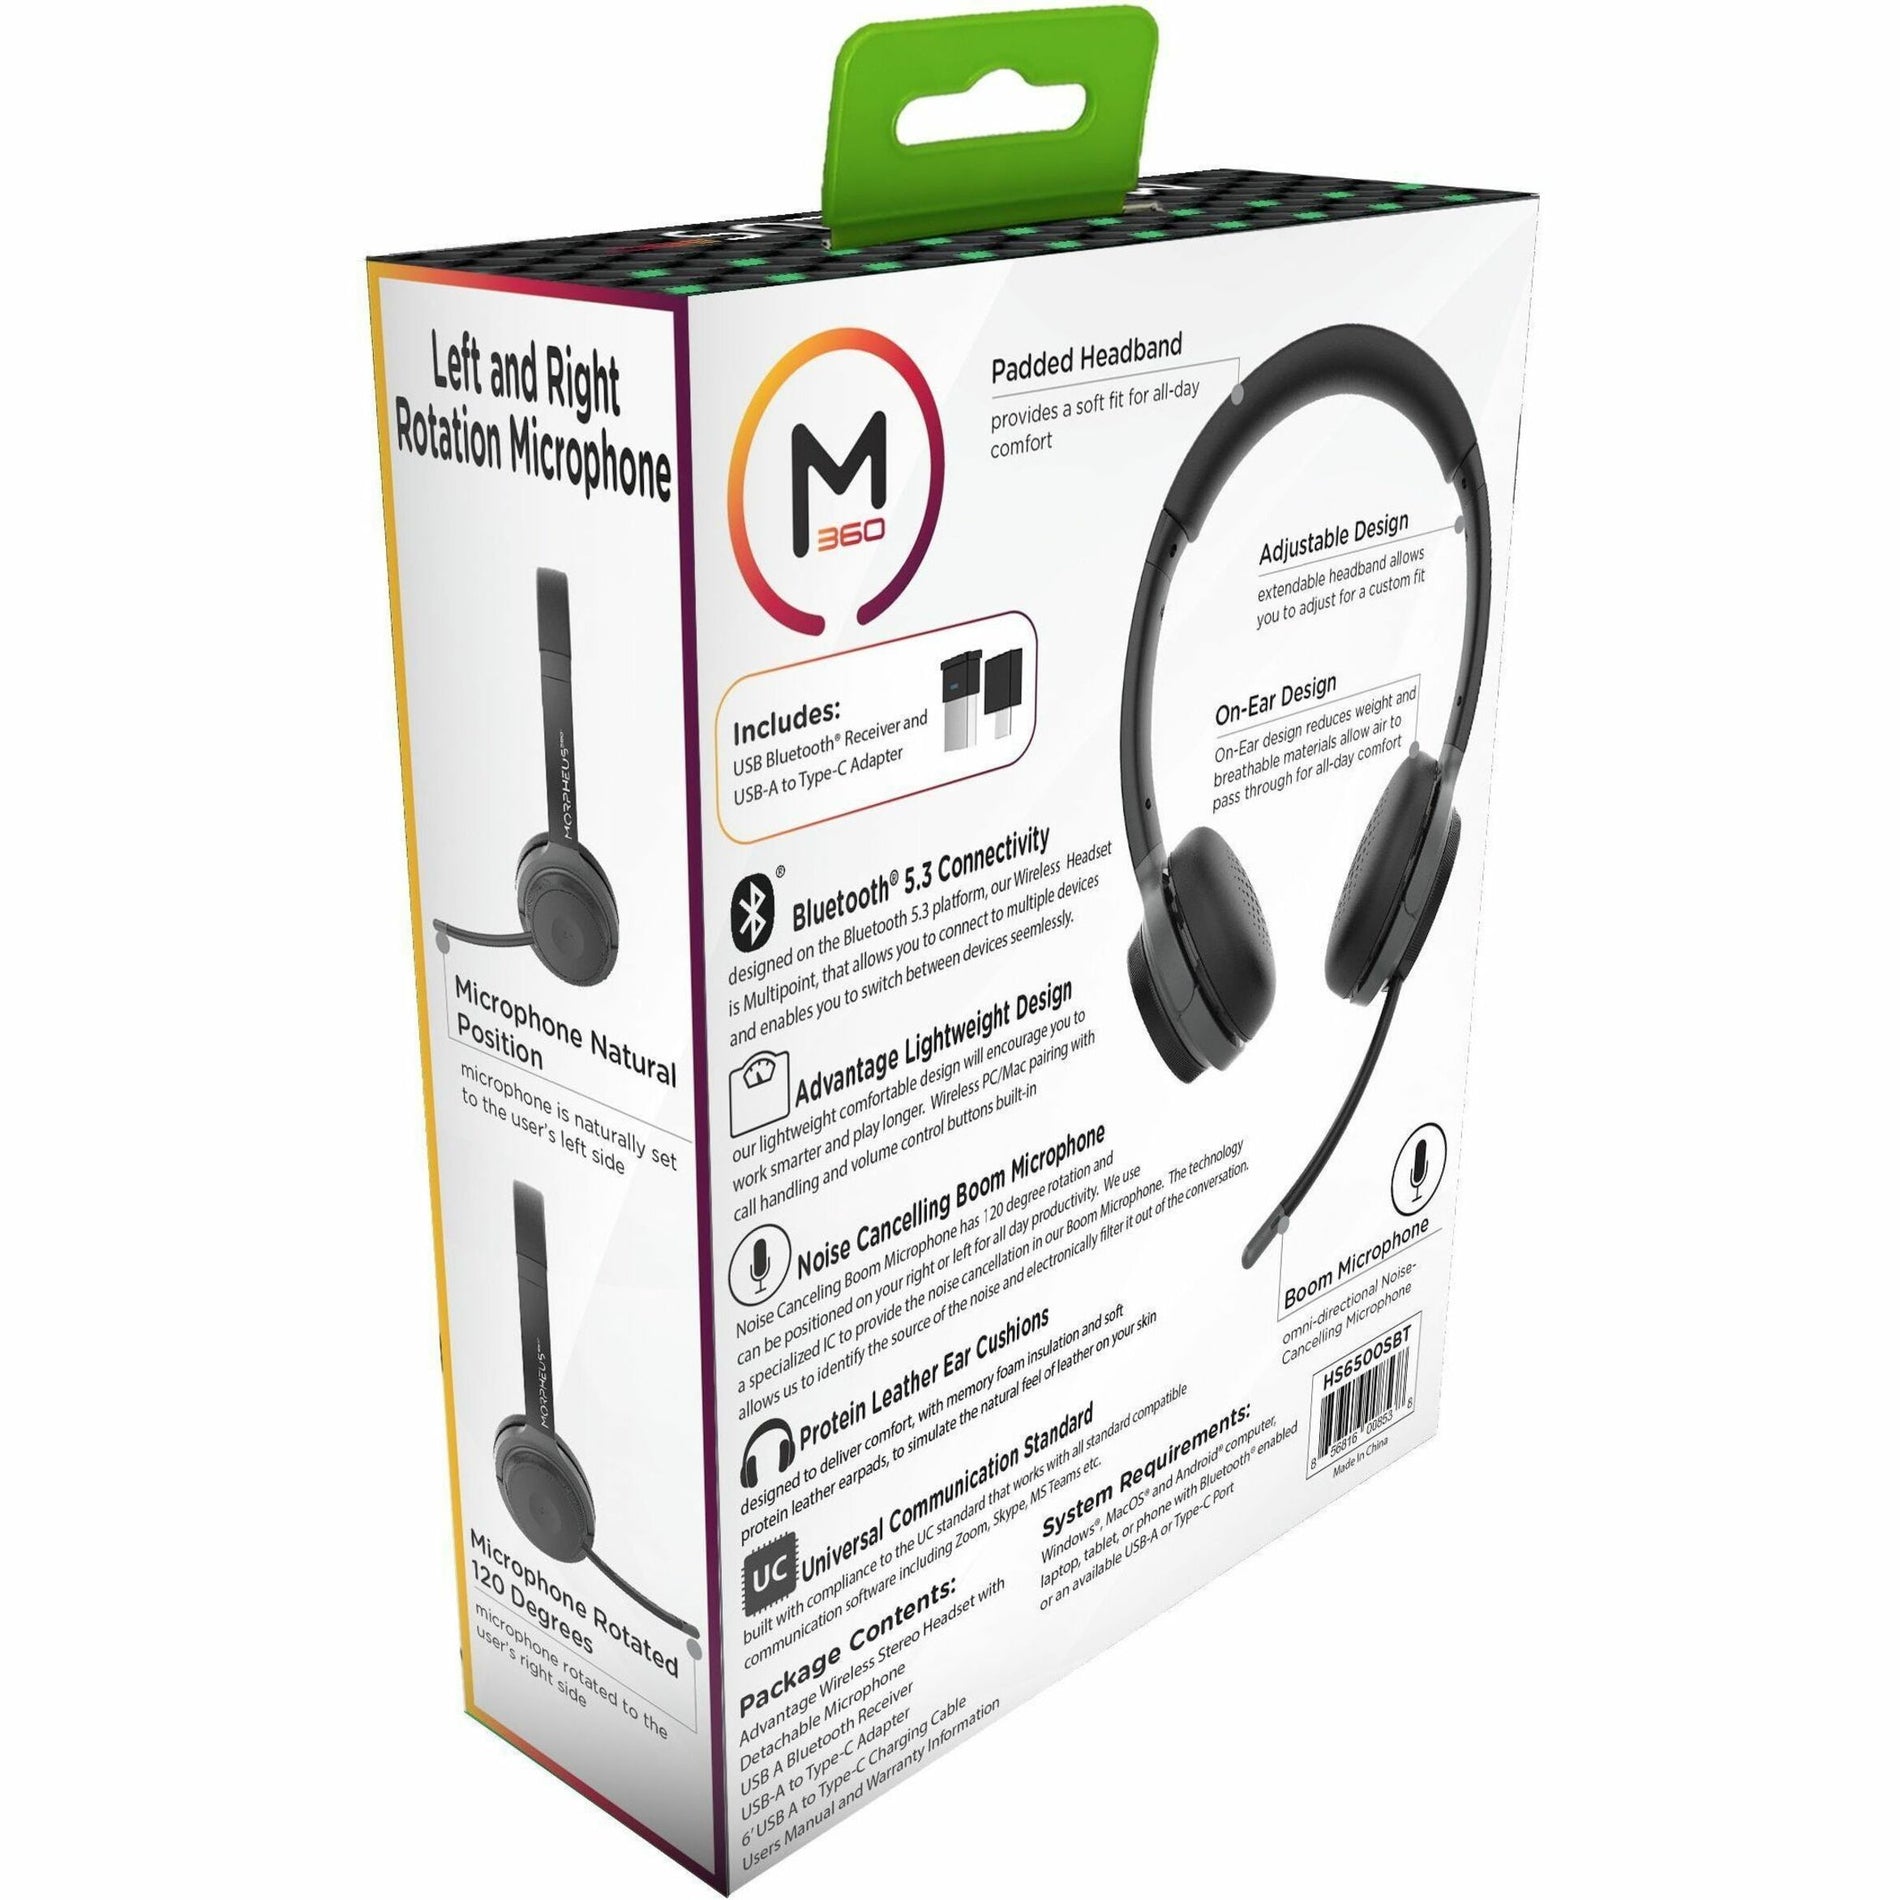 Morpheus 360 HS6500SBT Wireless Stereo Headset with Detachable Boom Microphone, Lightweight, Noise Cancelling, Bluetooth 5.3